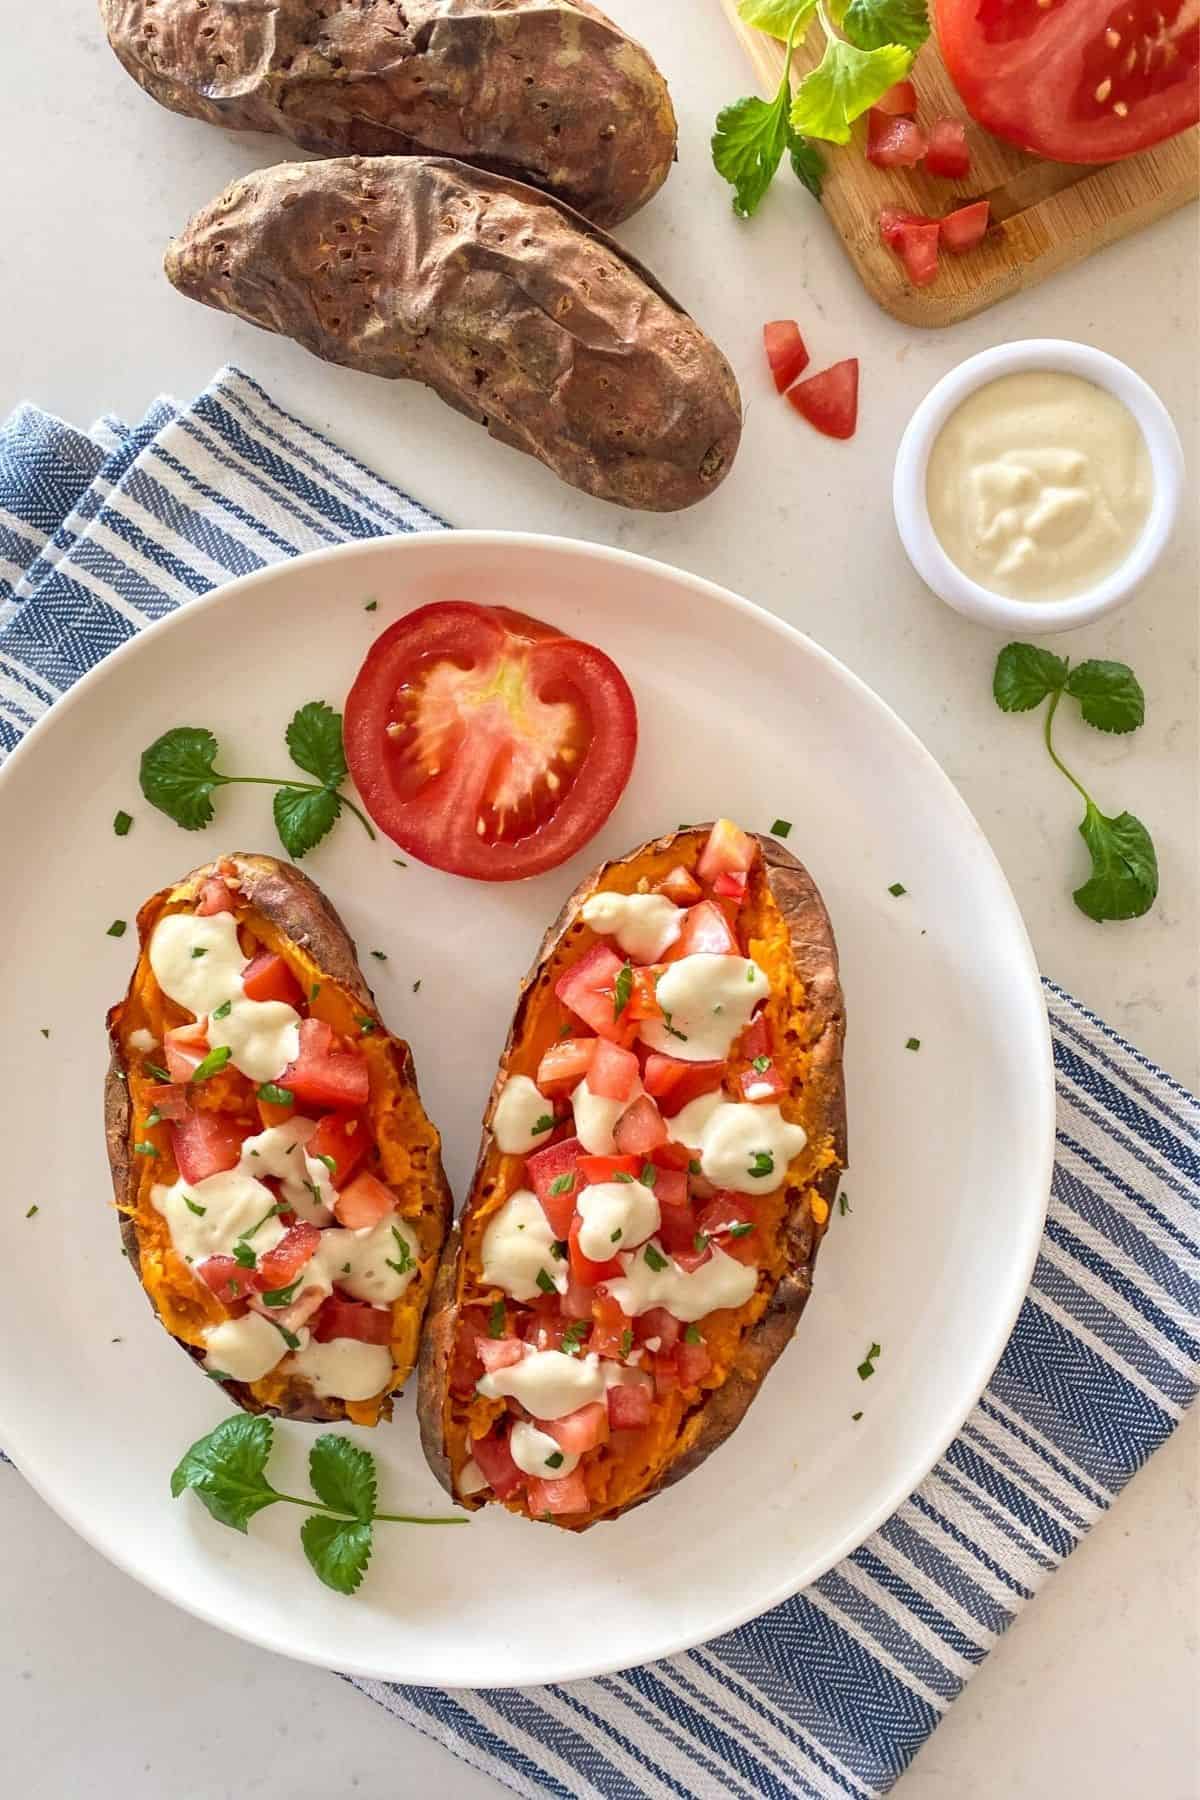 Baked sweet potatoes in white plate with tomato and sour cream and whole cooked sweet potatoes in background.